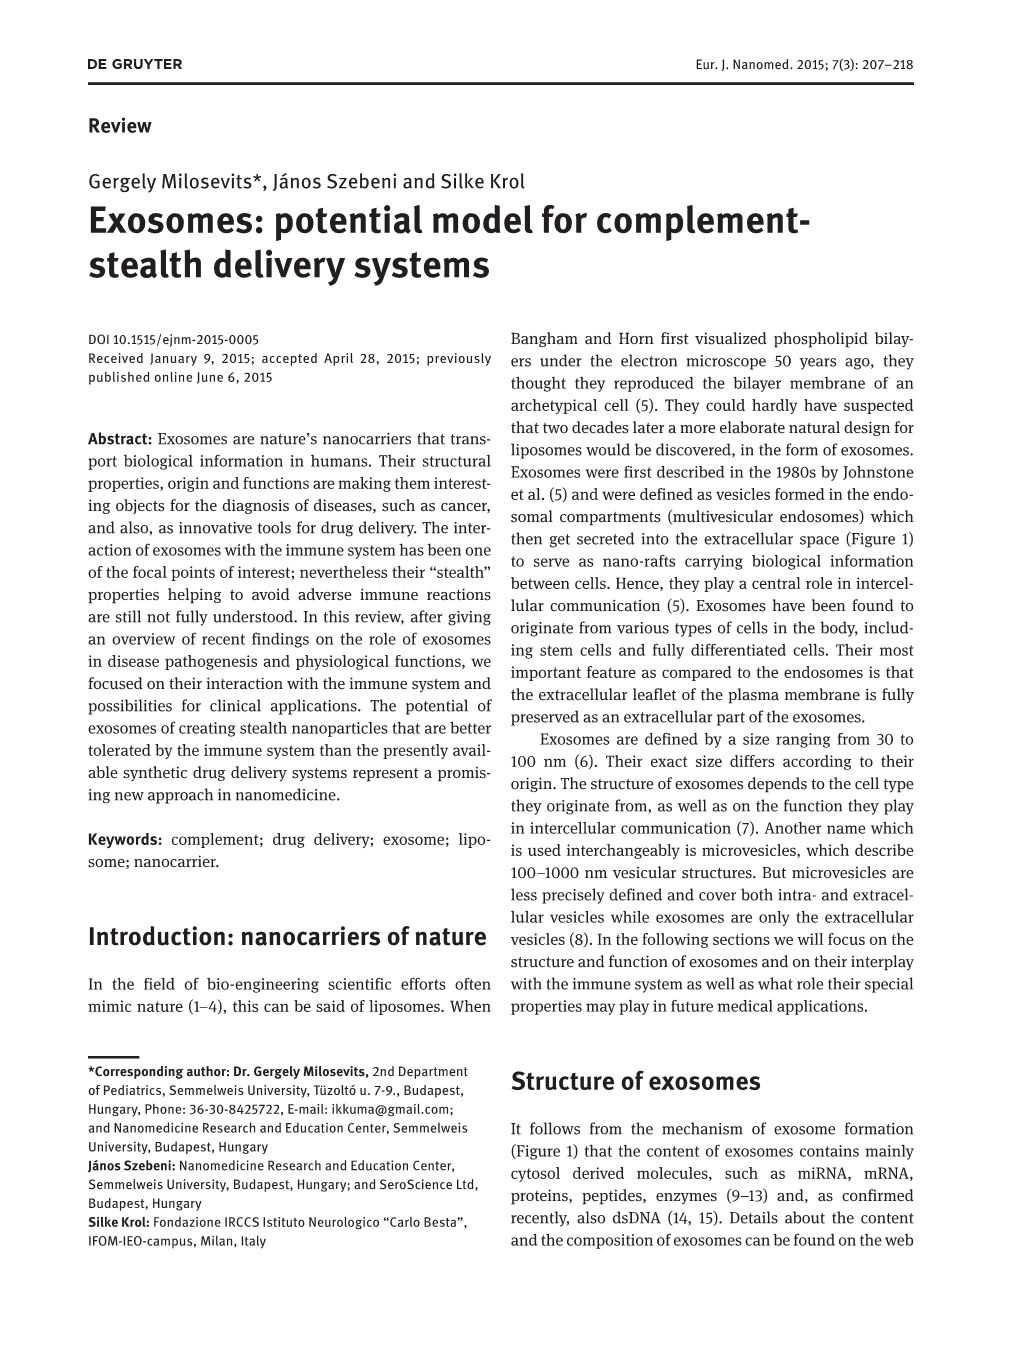 Exosomes: Potential Model for Complement- Stealth Delivery Systems